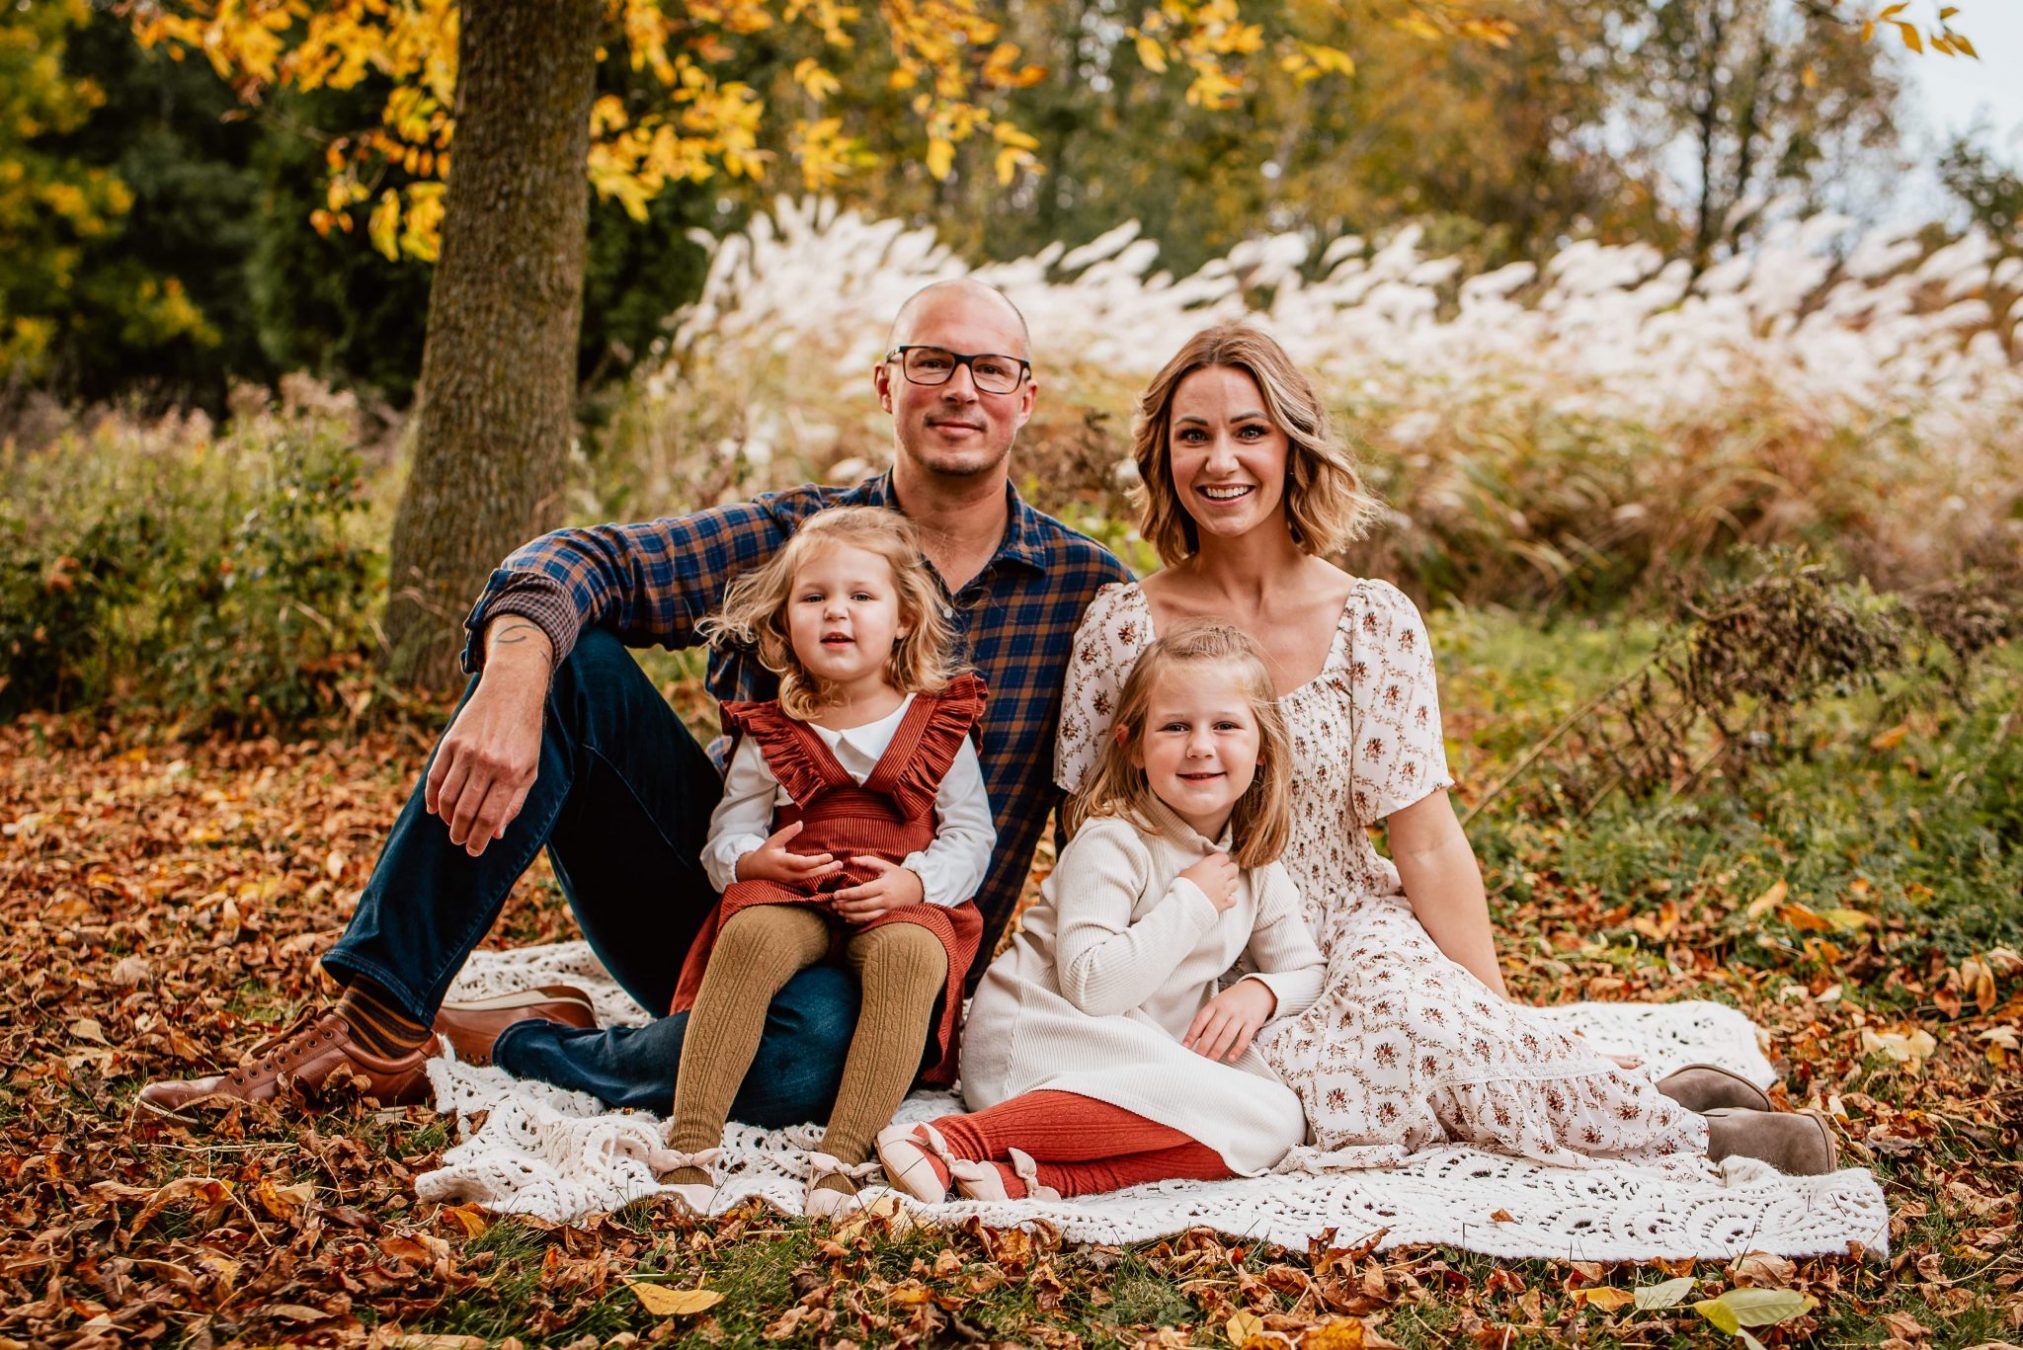 Outdoor Family Photography in Appleton, WI by Daphodil Photo